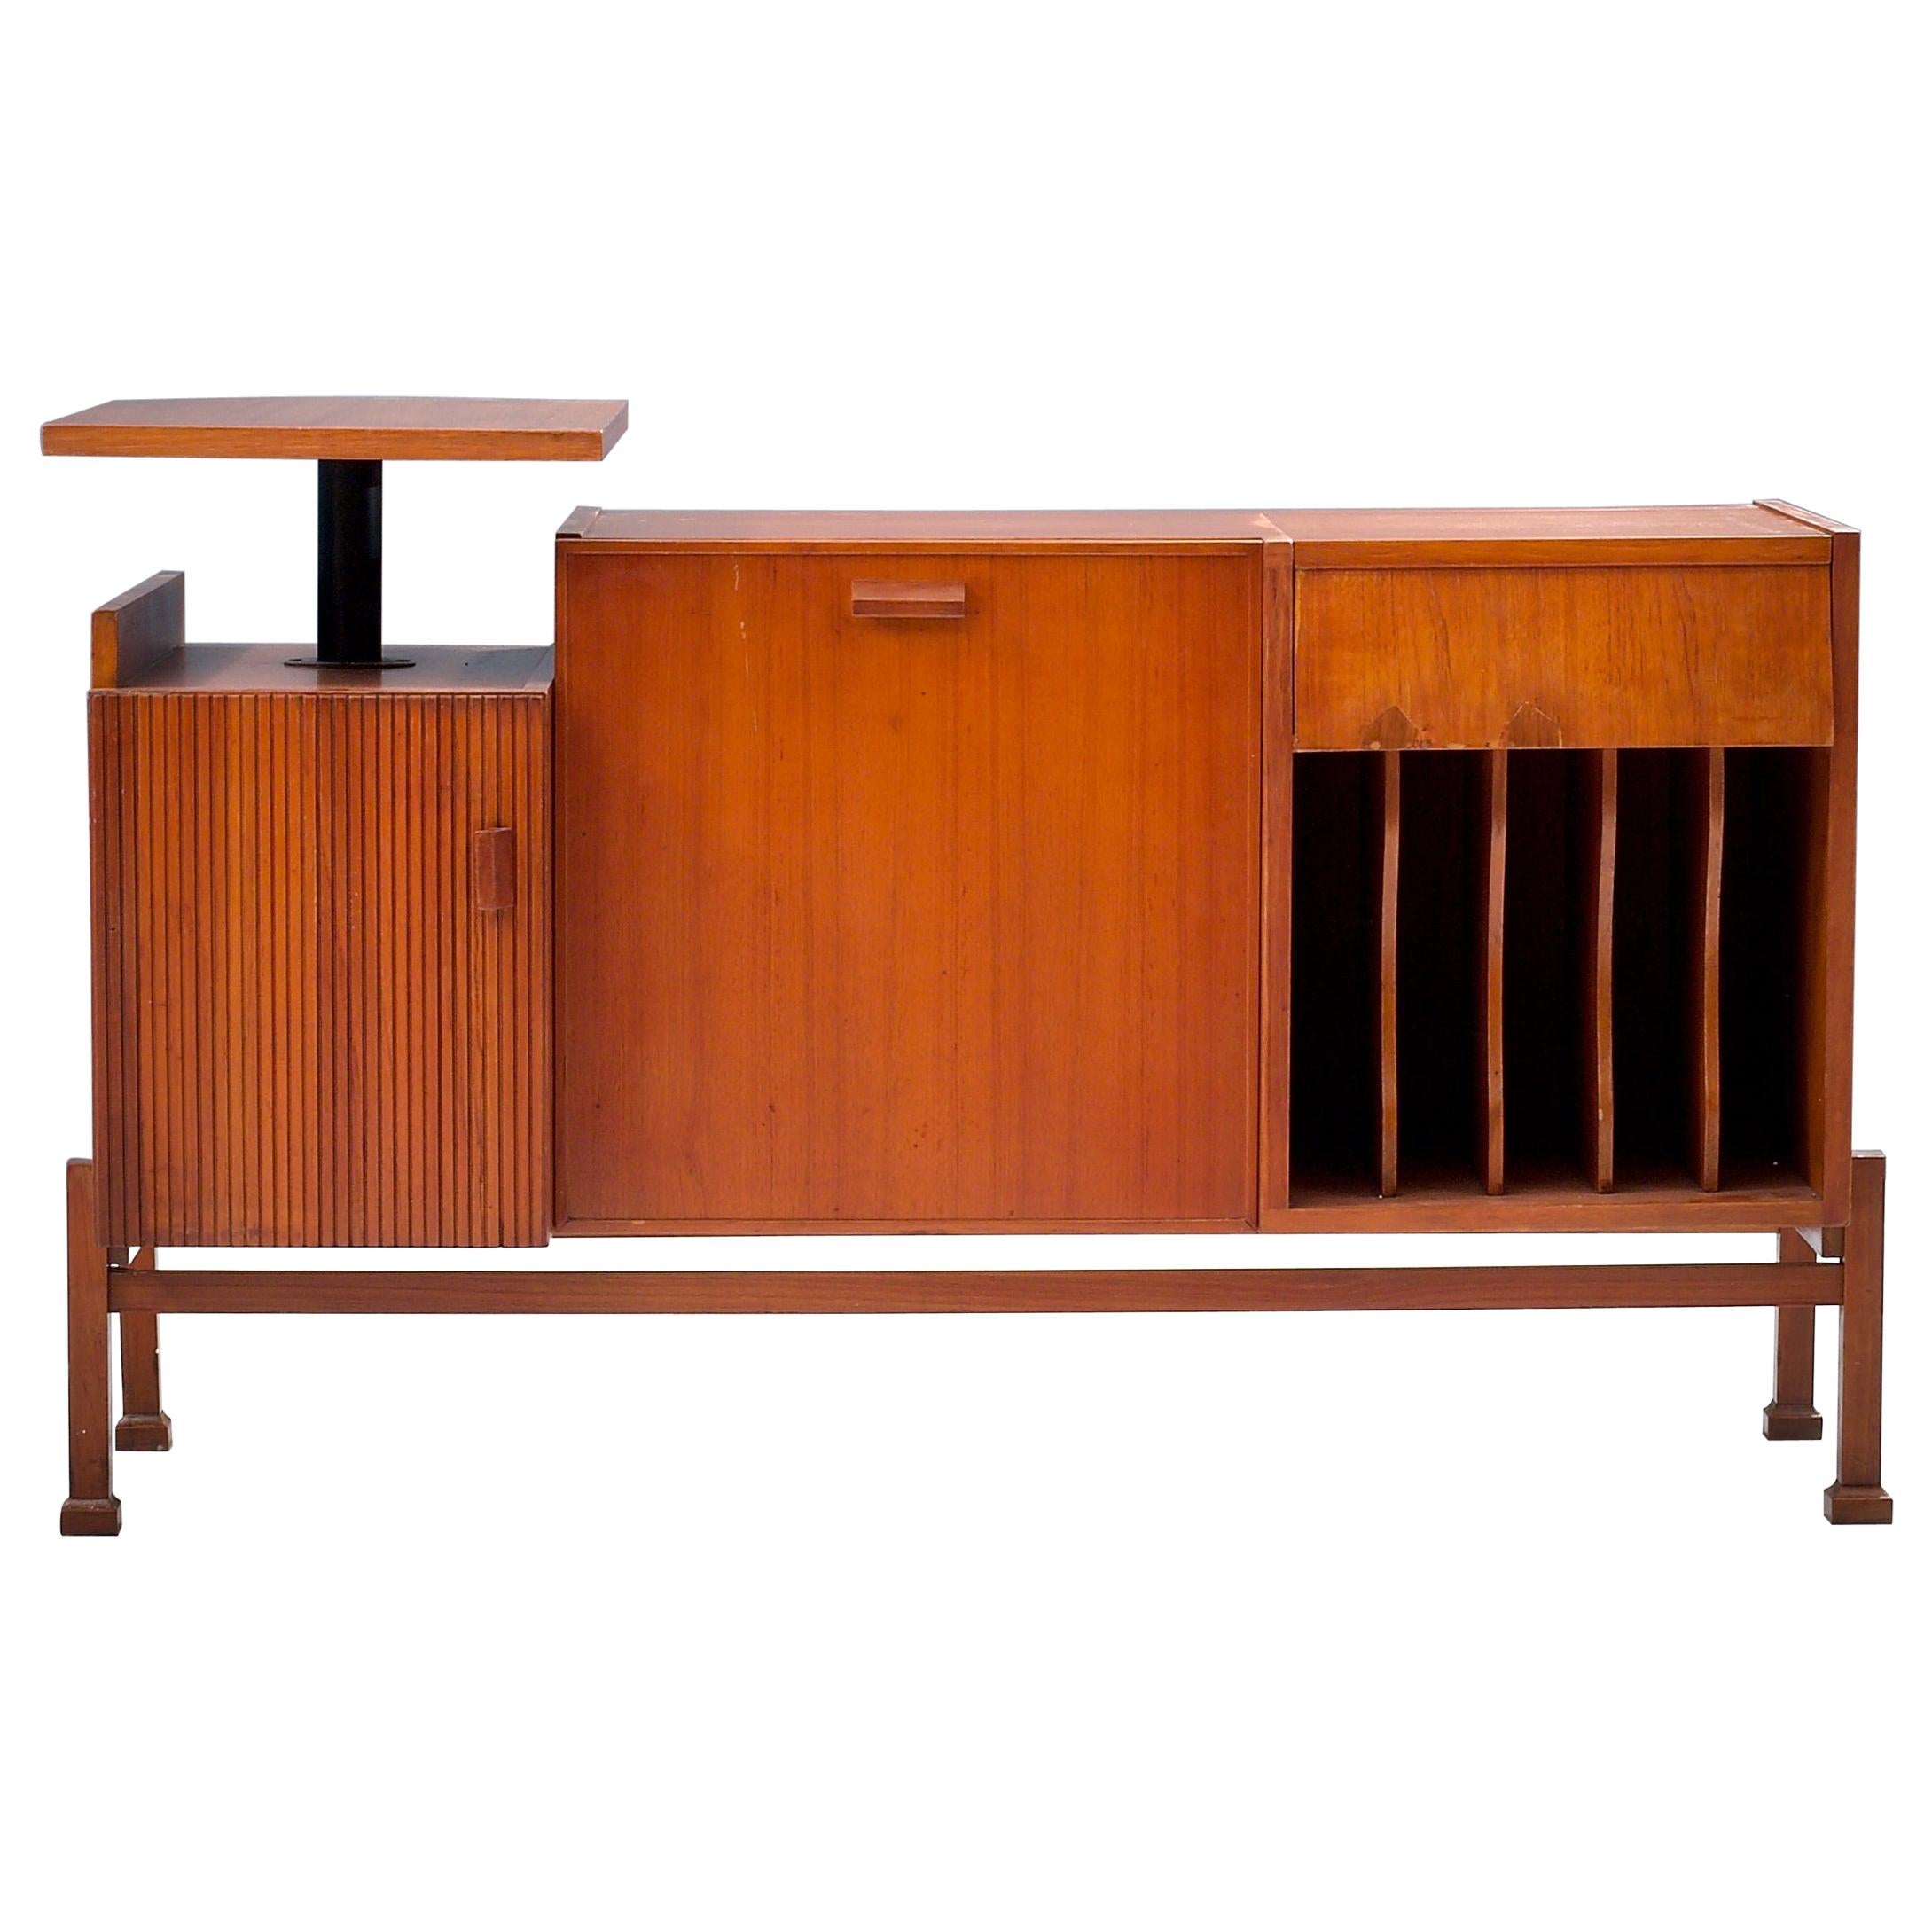 Geometrical Sideboard / DJ Booth in Patinated Teak, France, 1950s